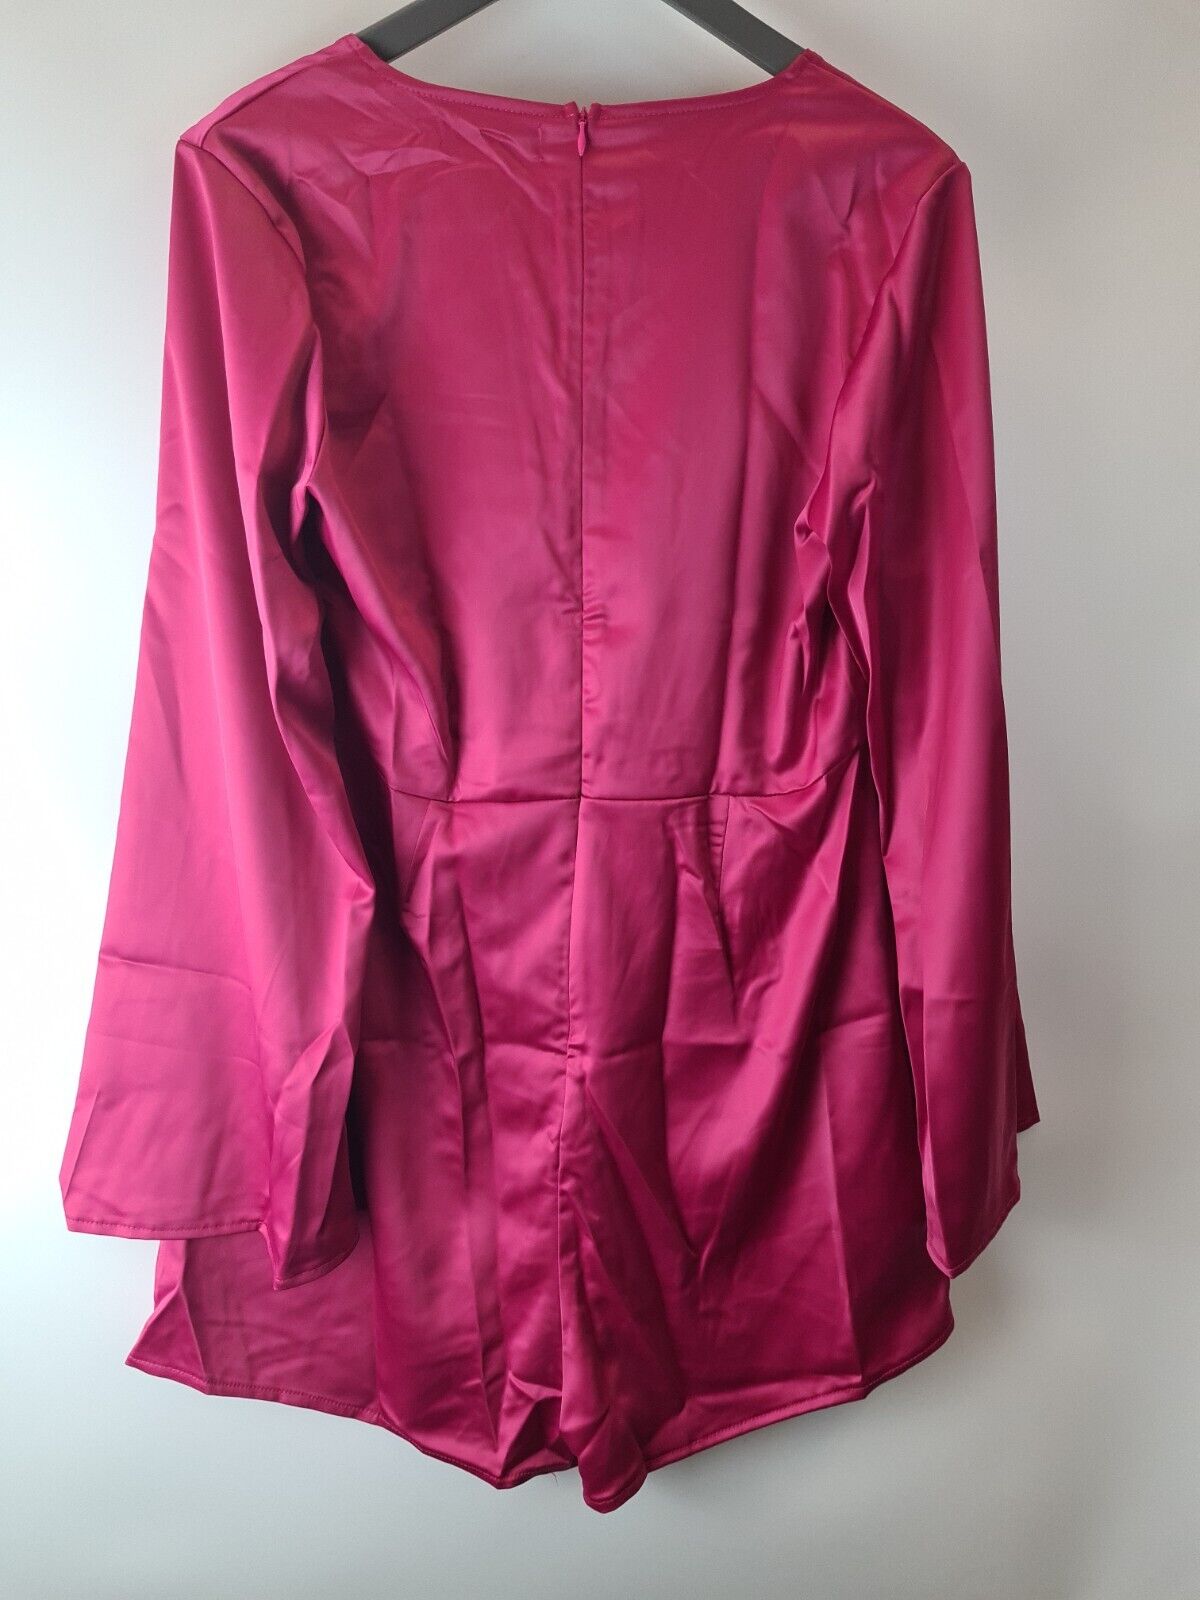 Missguided Satin Tie Front Flare Sleeves Hot Pink Playsuit Size 12 **** V36